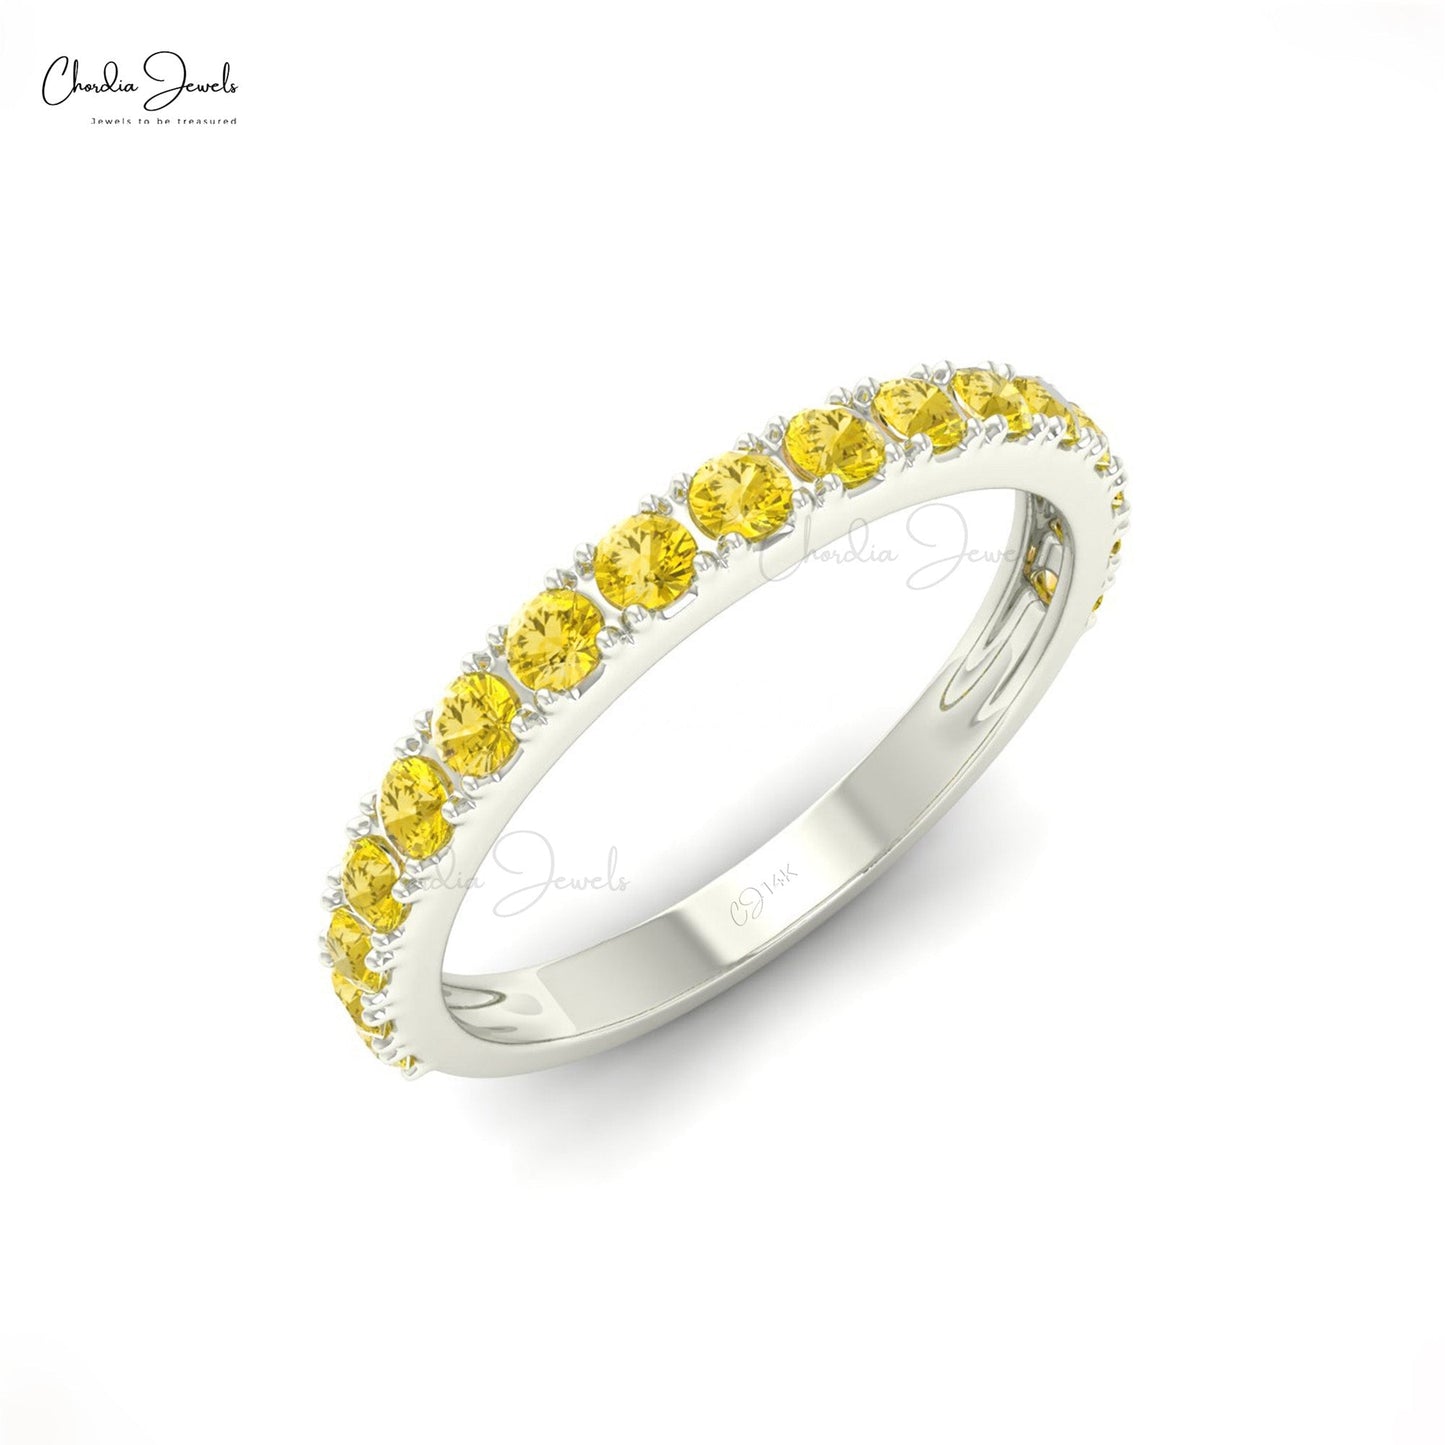 Load image into Gallery viewer, Beautiful 2MM Half Eternity Ring Band in Yellow Sapphire
